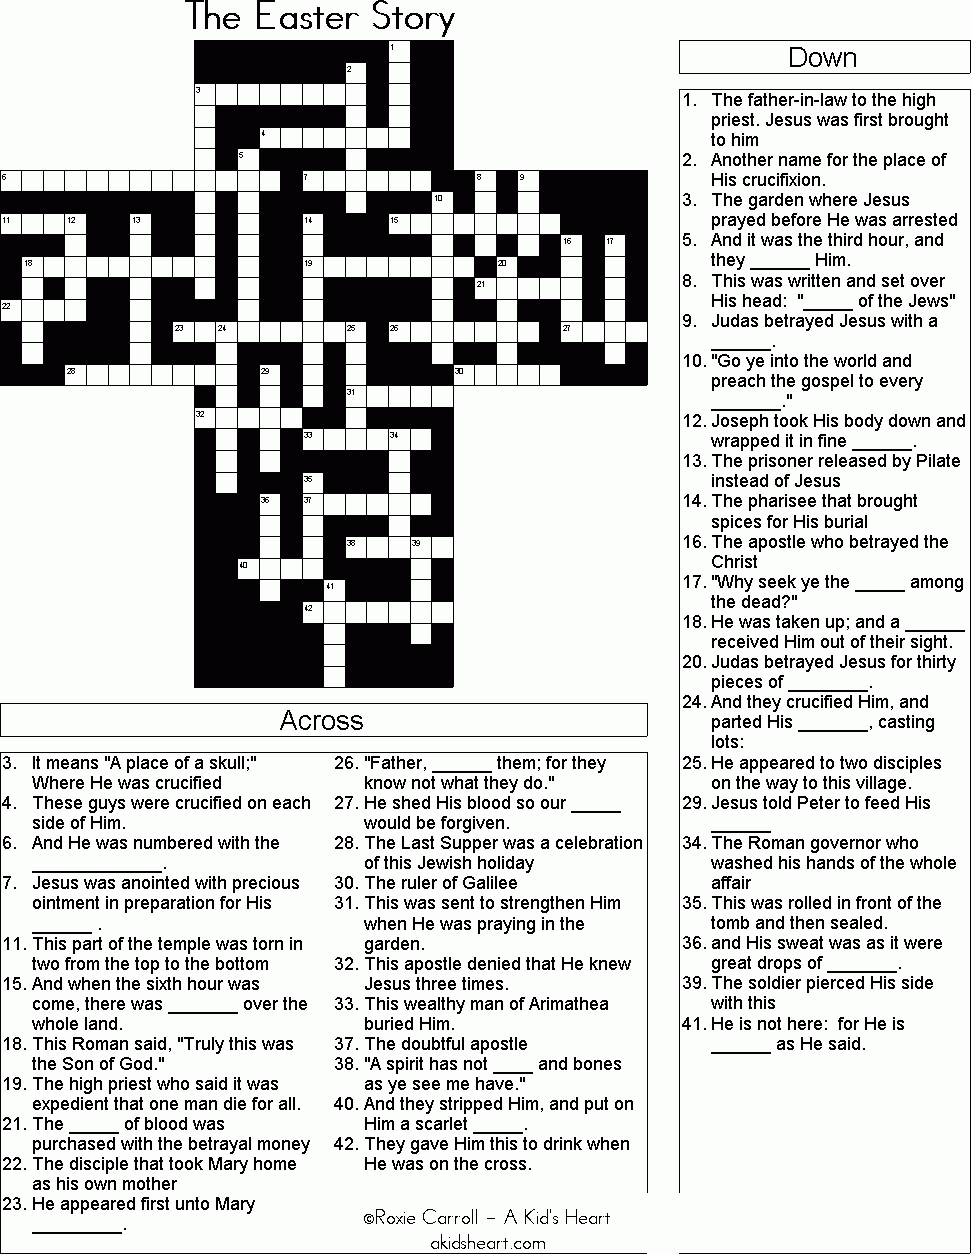 The Easter Story Crossword Puzzle | Bible Crosswords/word Search - Printable Bible Puzzles Kjv